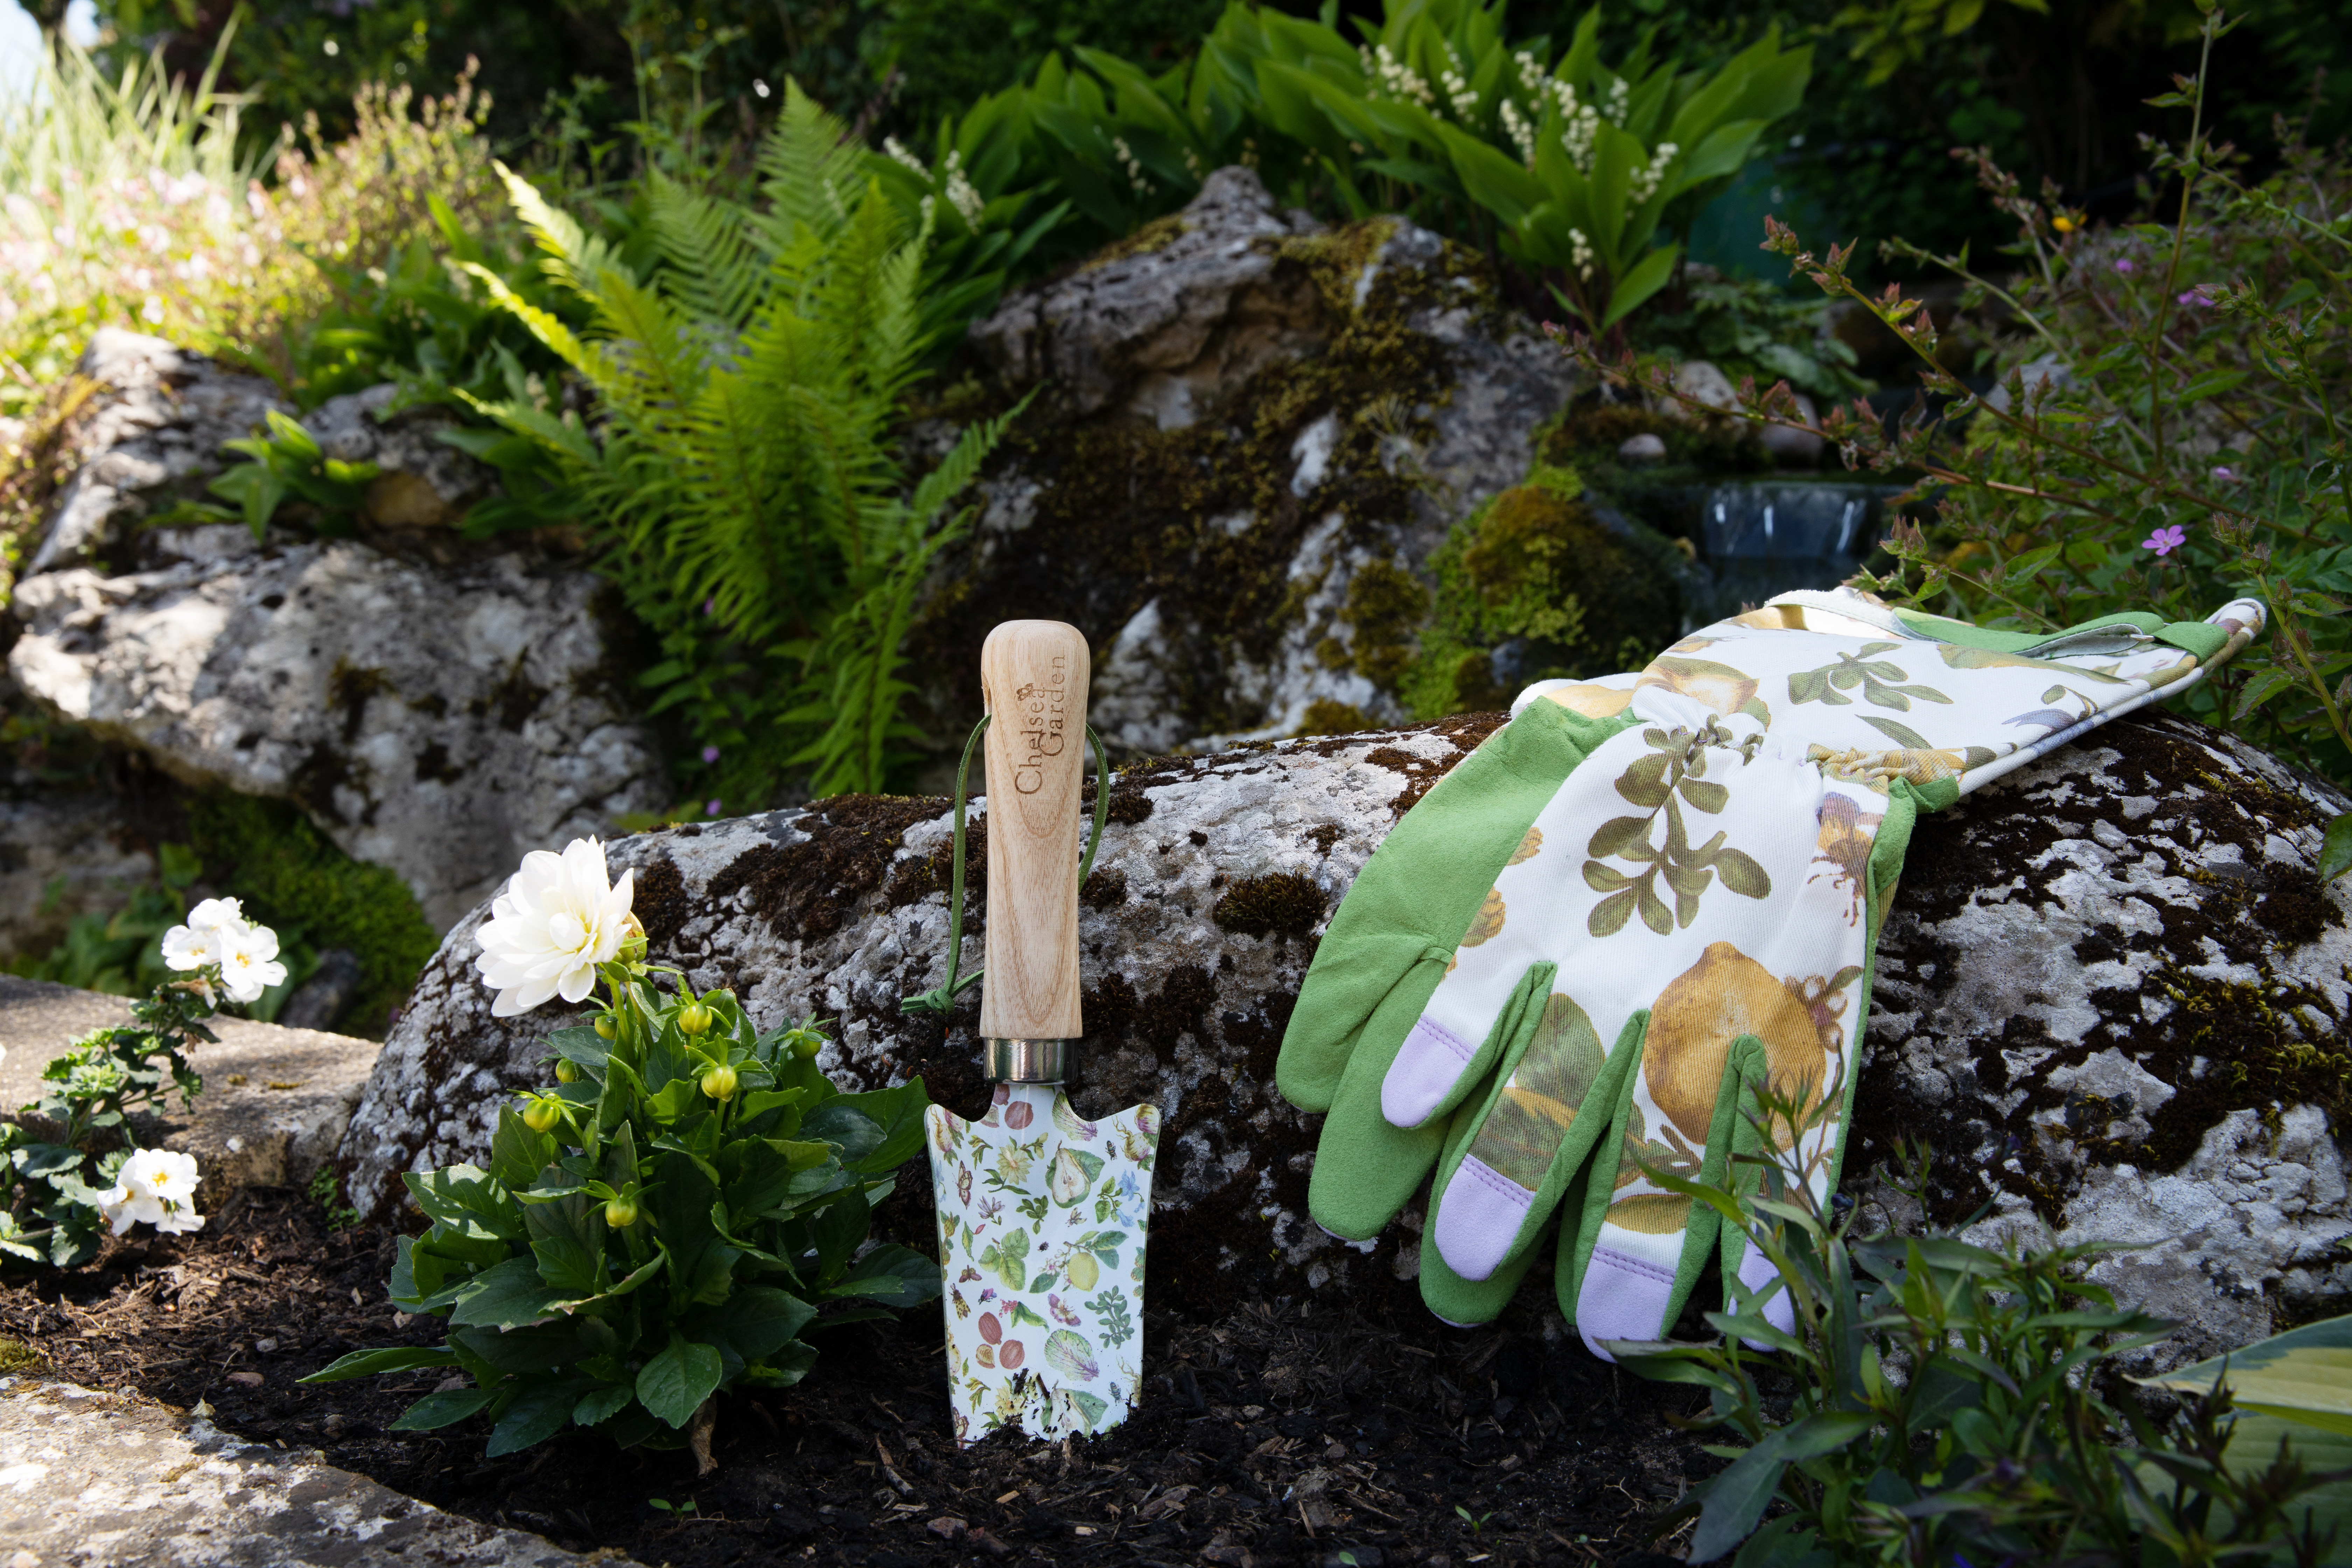 The trowel being used in a garden, with the gardening gloves lying on a rock